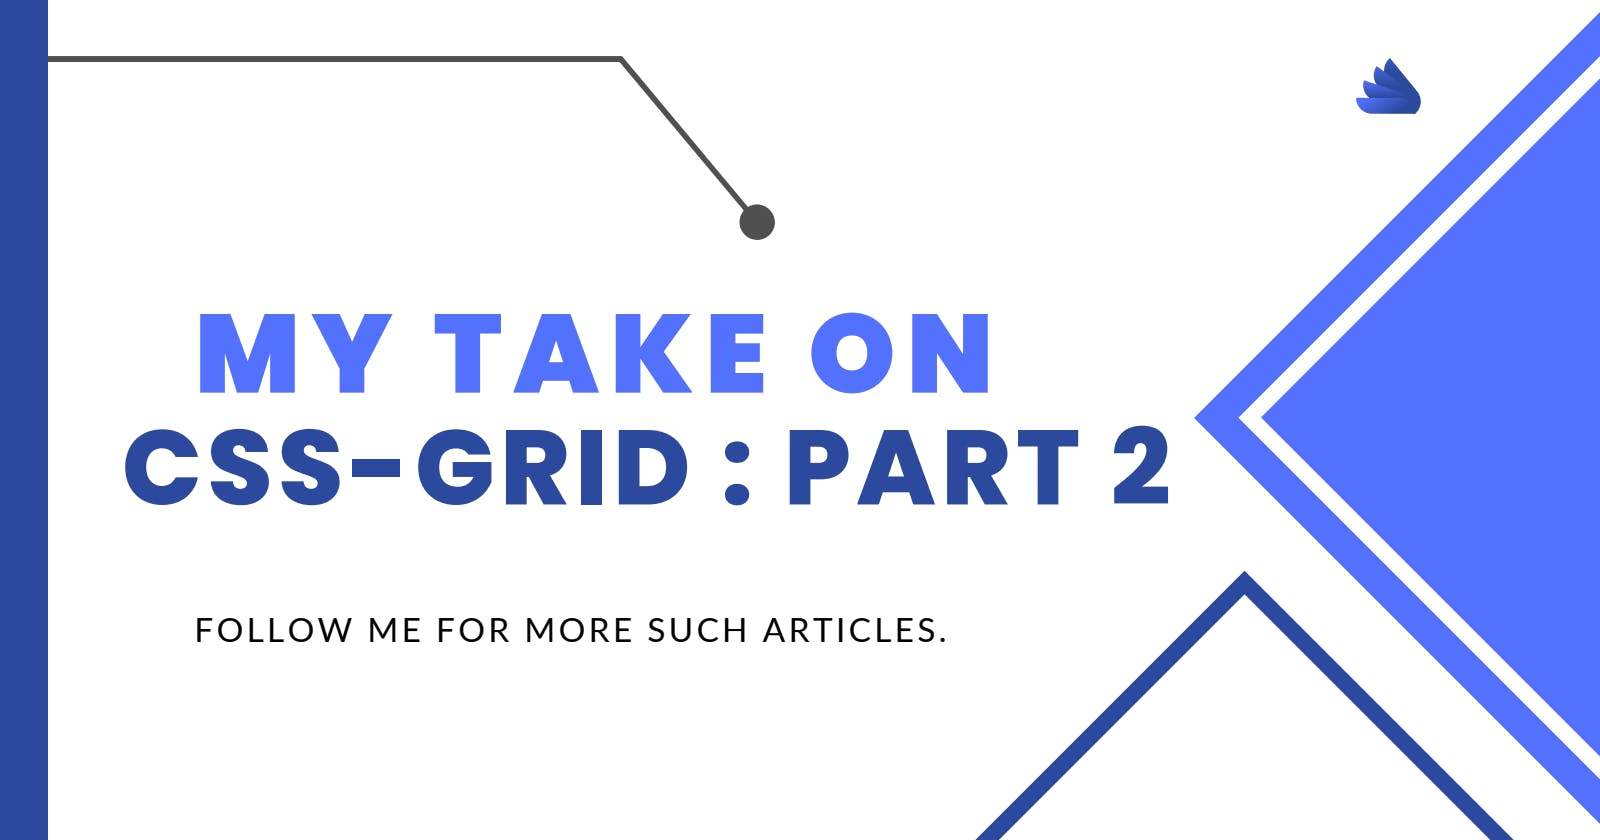 My take on CSS-GRID : PART 2